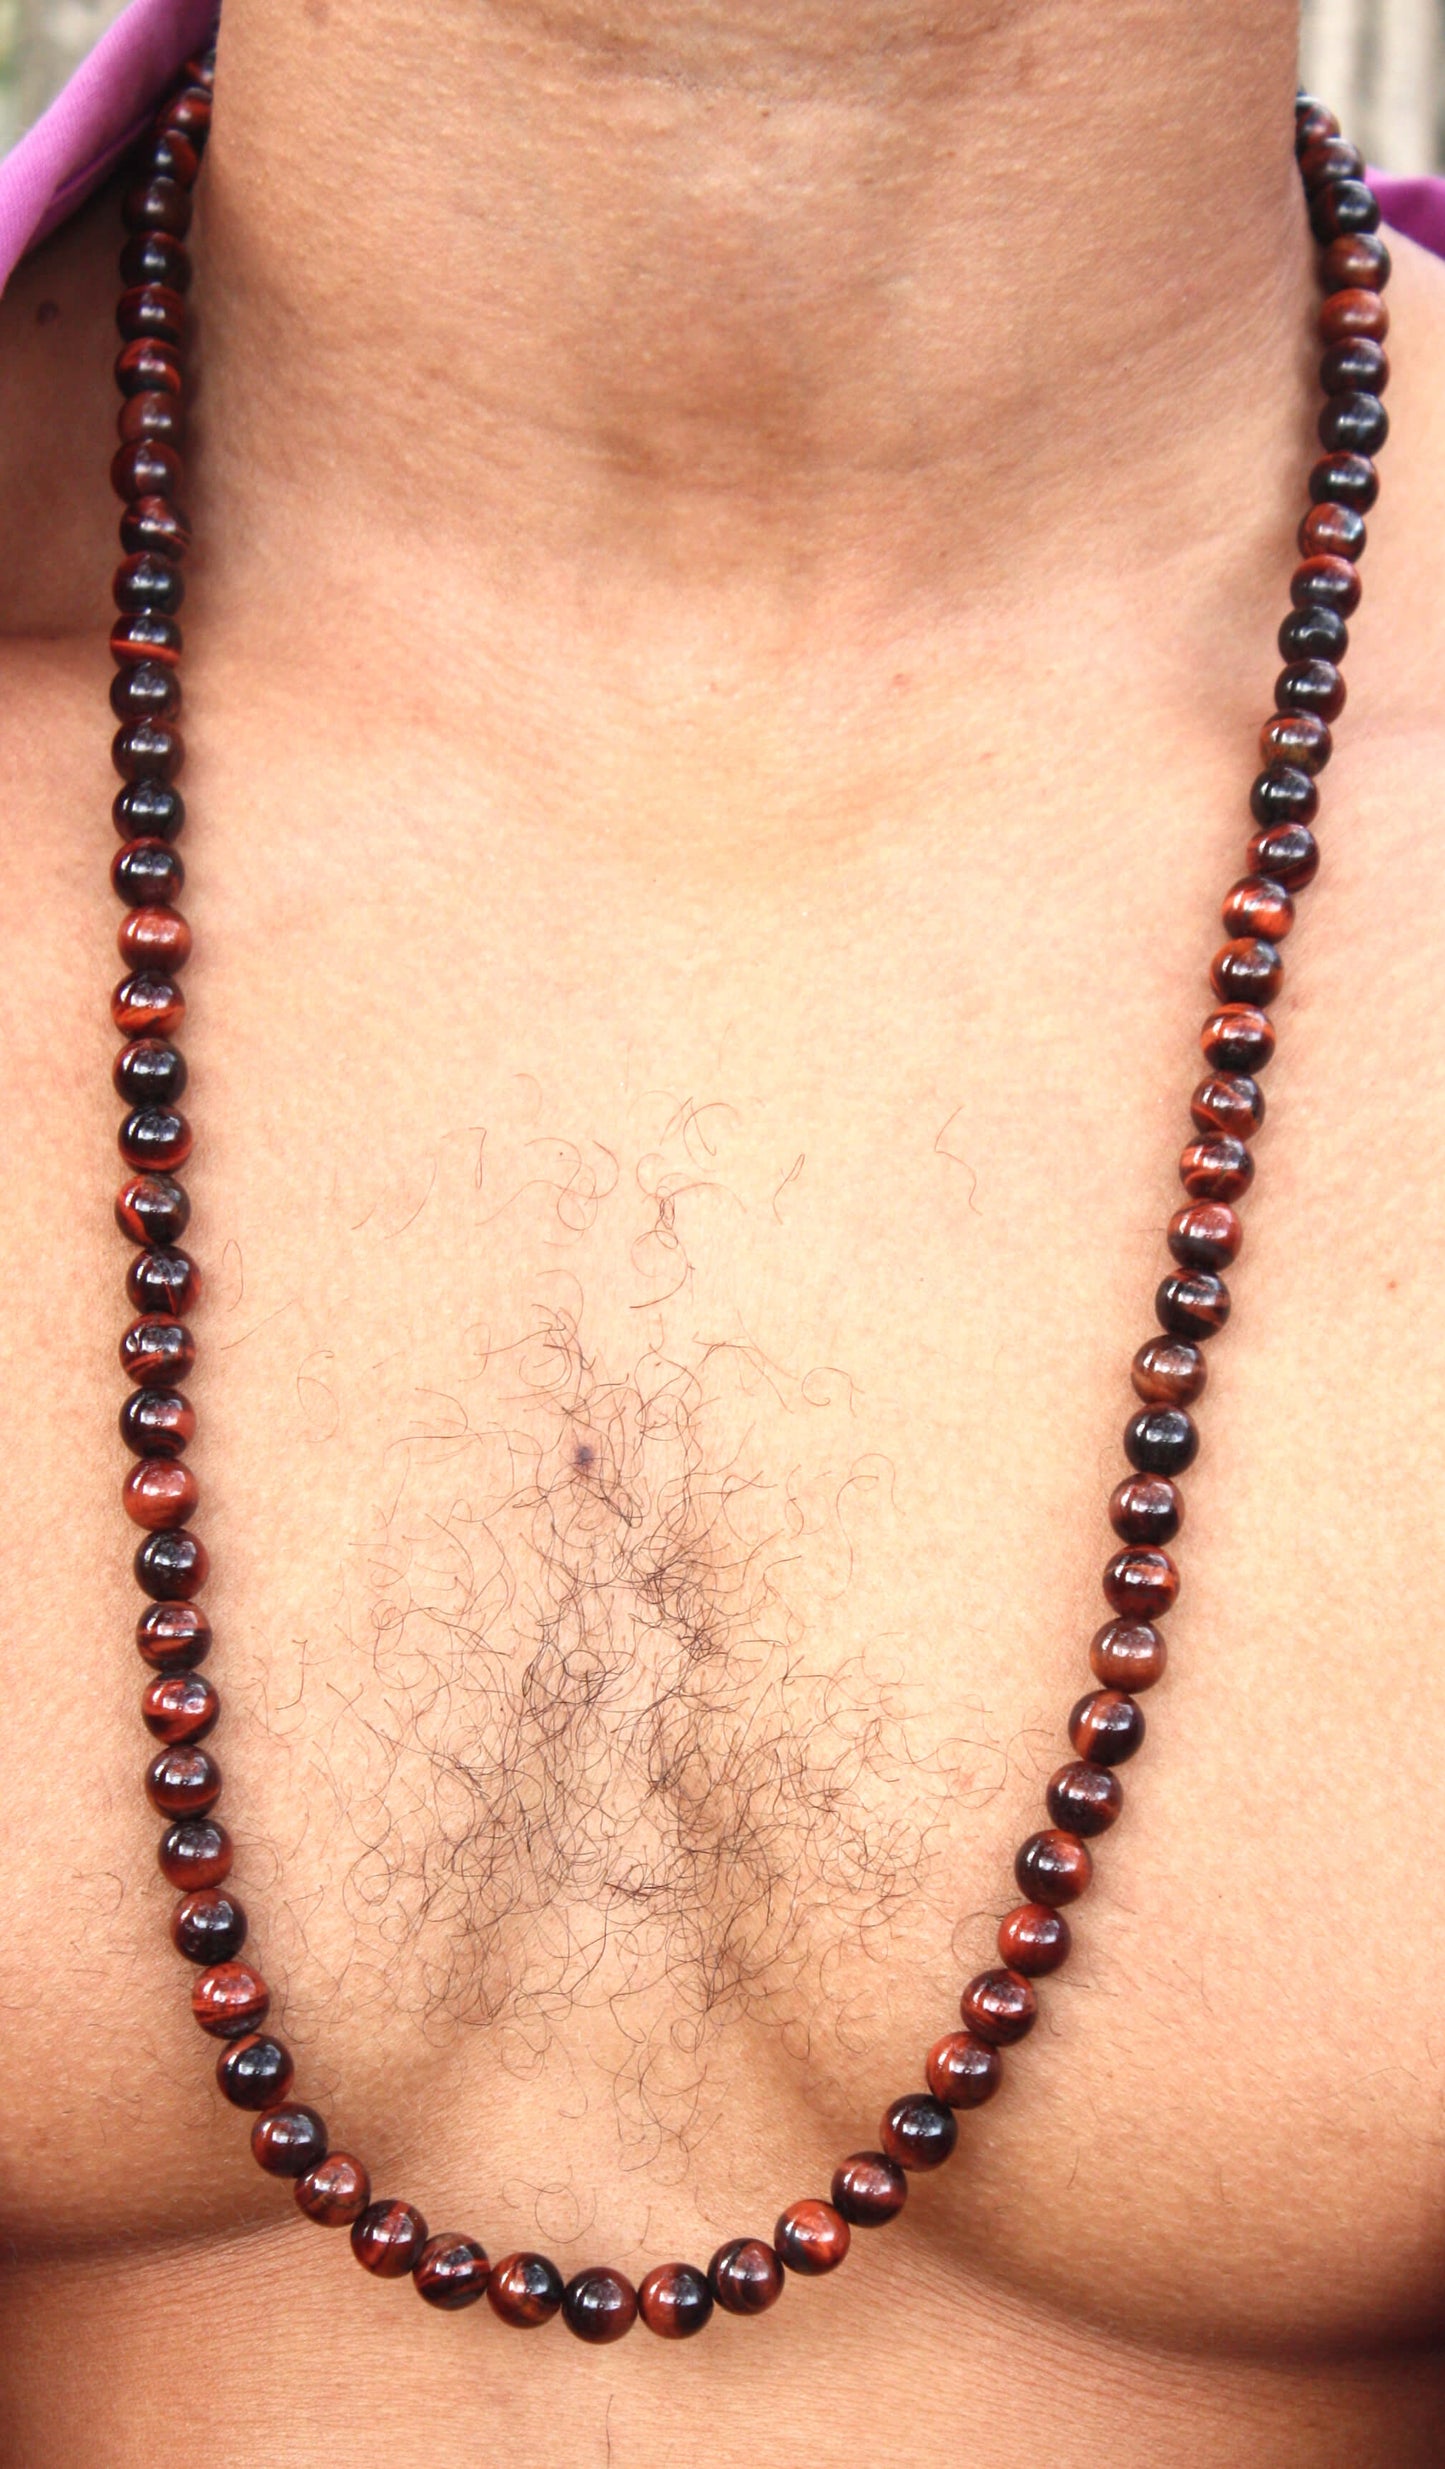 30 inch Red Tiger Eye Necklace 8mm